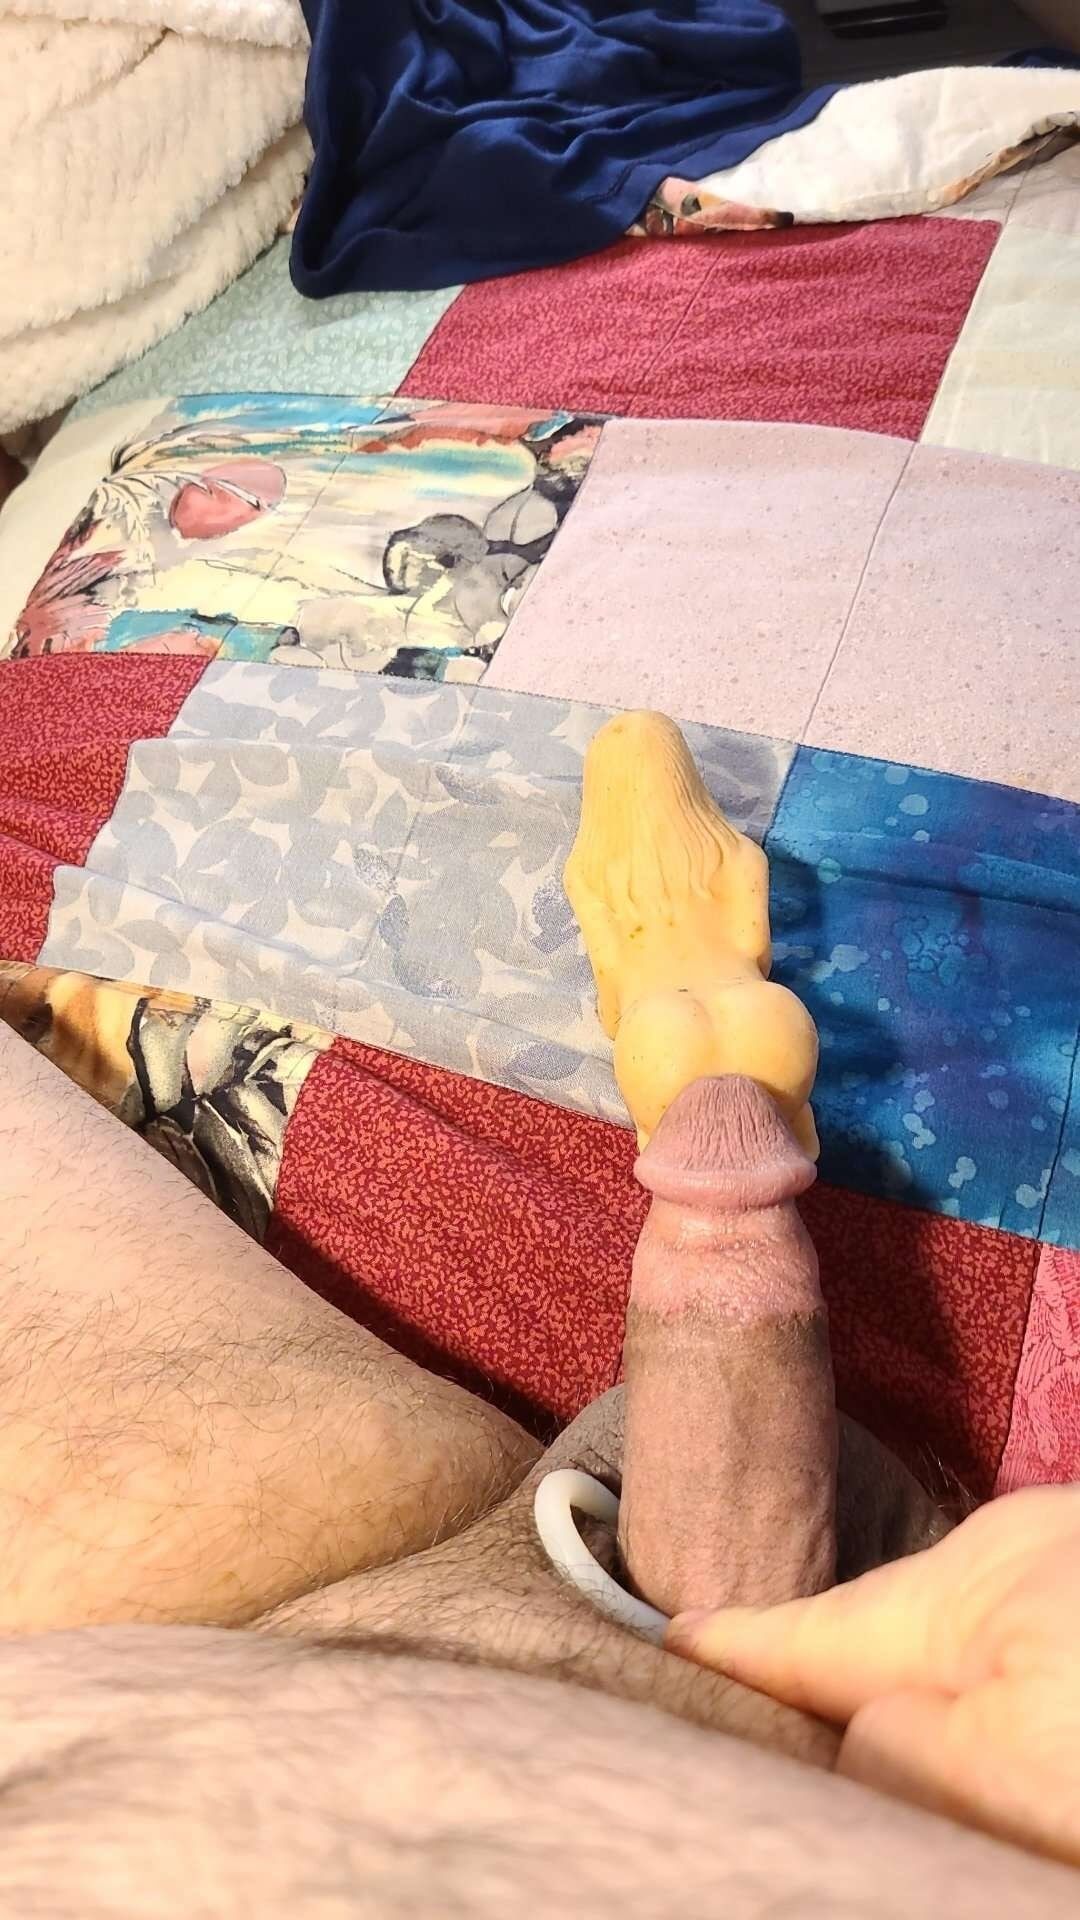 My new real nudes naked pictures with my sex toys cock ring  #2